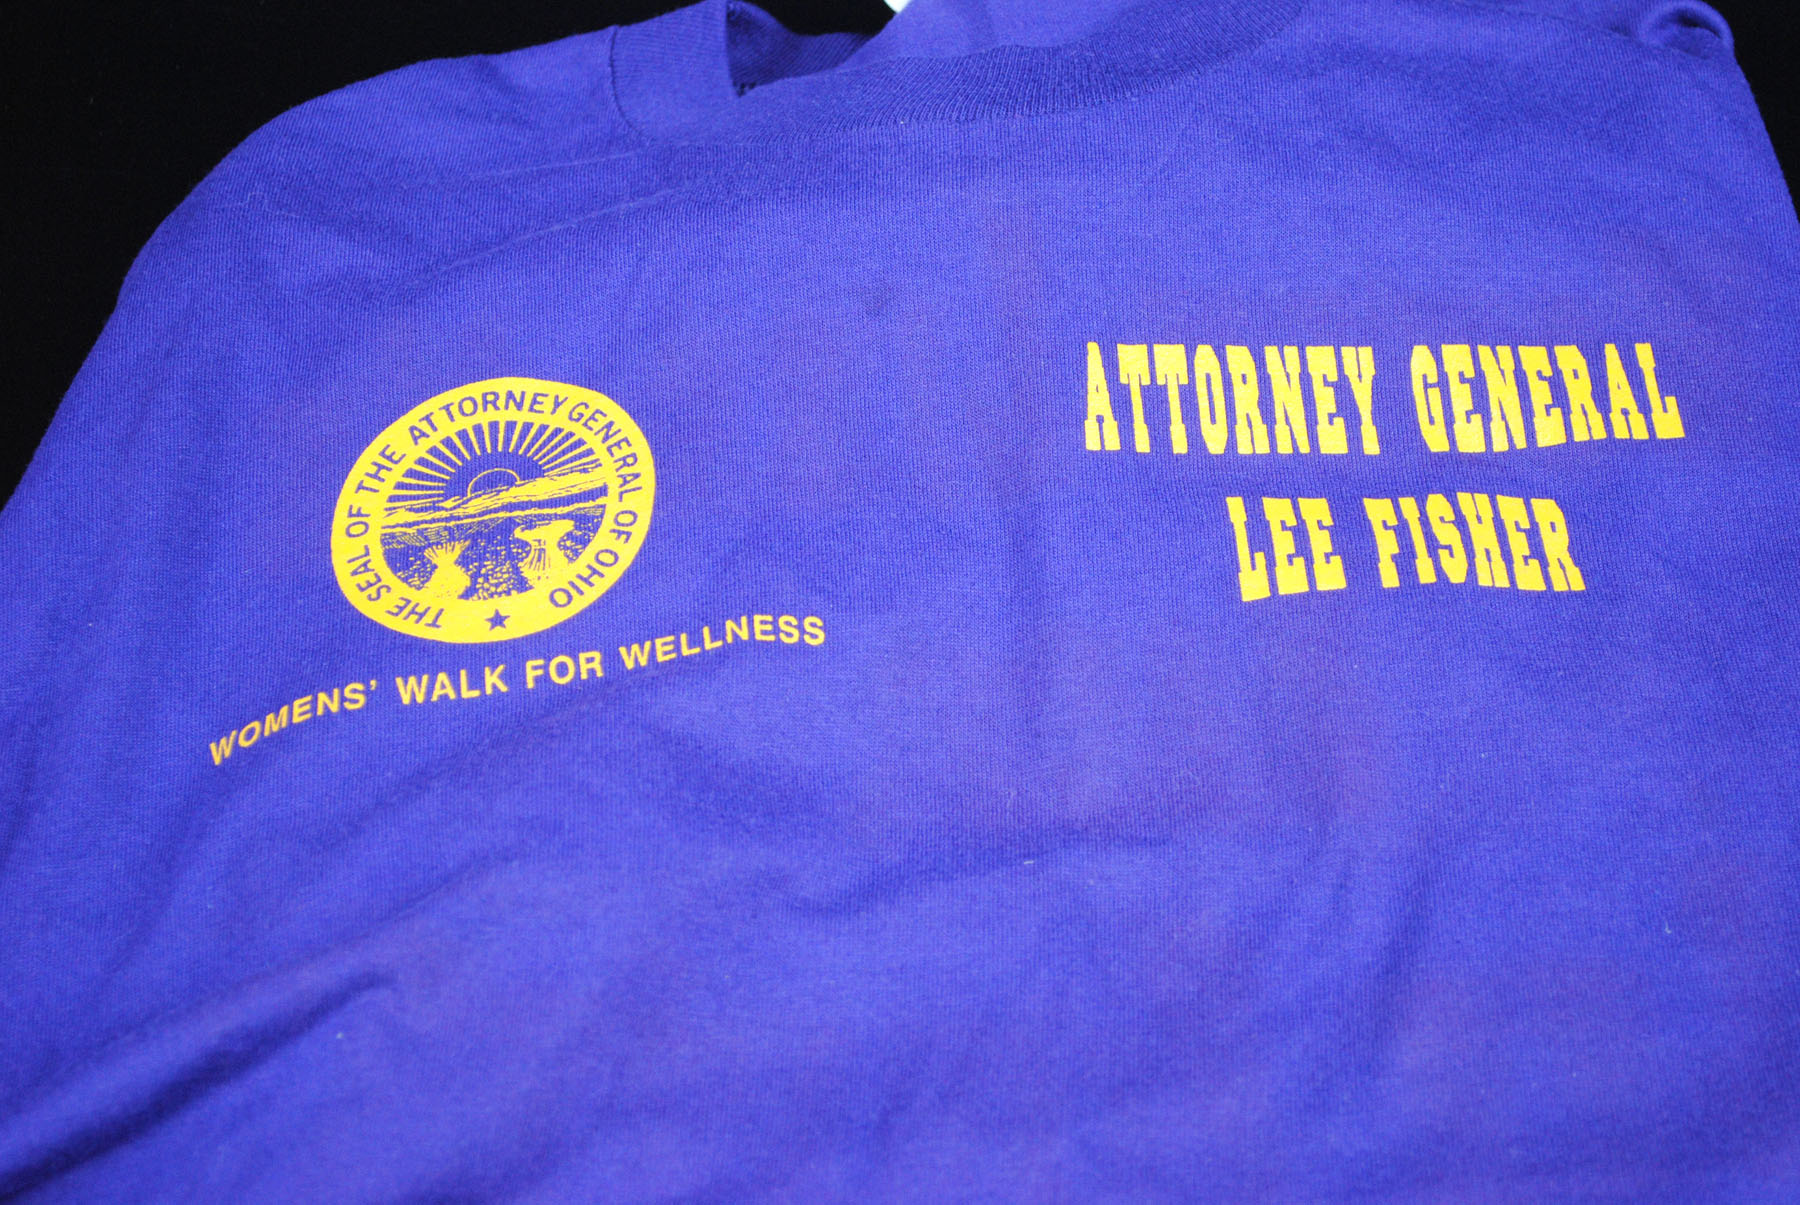 Attorney General Lee Fisher's Women's Walk for Wellness T-Shirt  